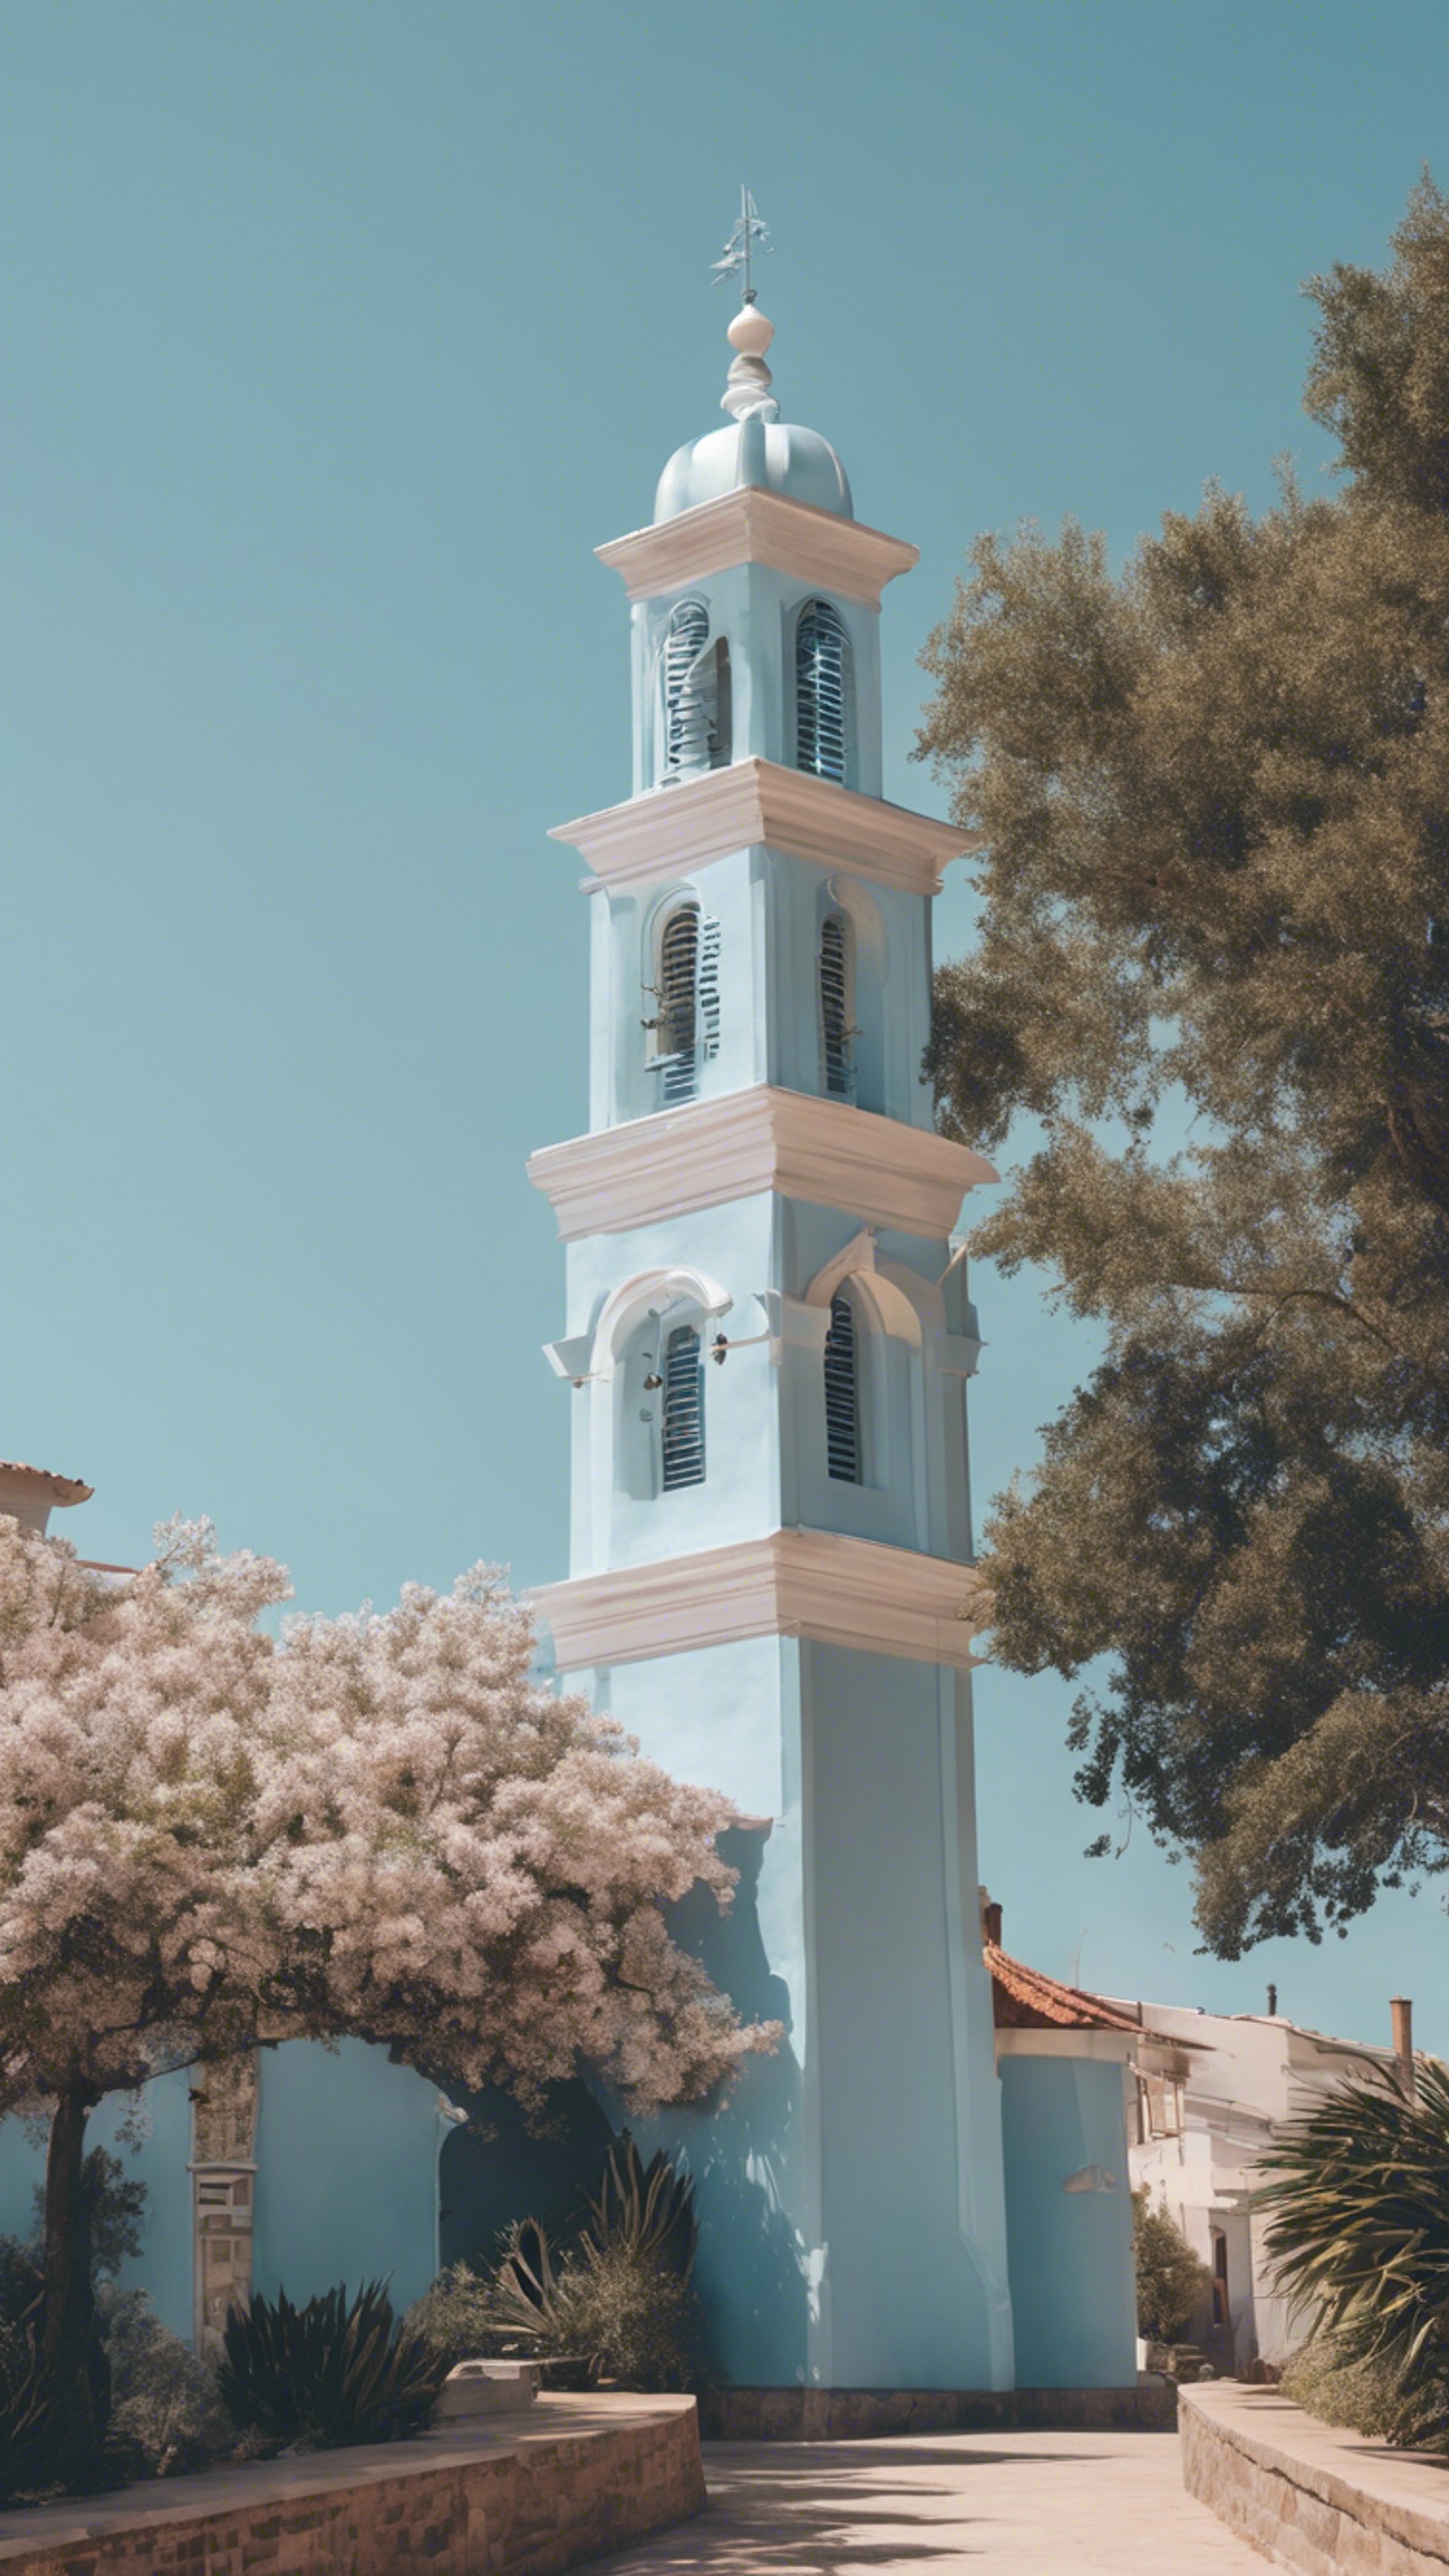 A stately pastel blue bell tower against a clear, sunny sky in a coastal town. Behang[a05c52dcc3054b35b6be]